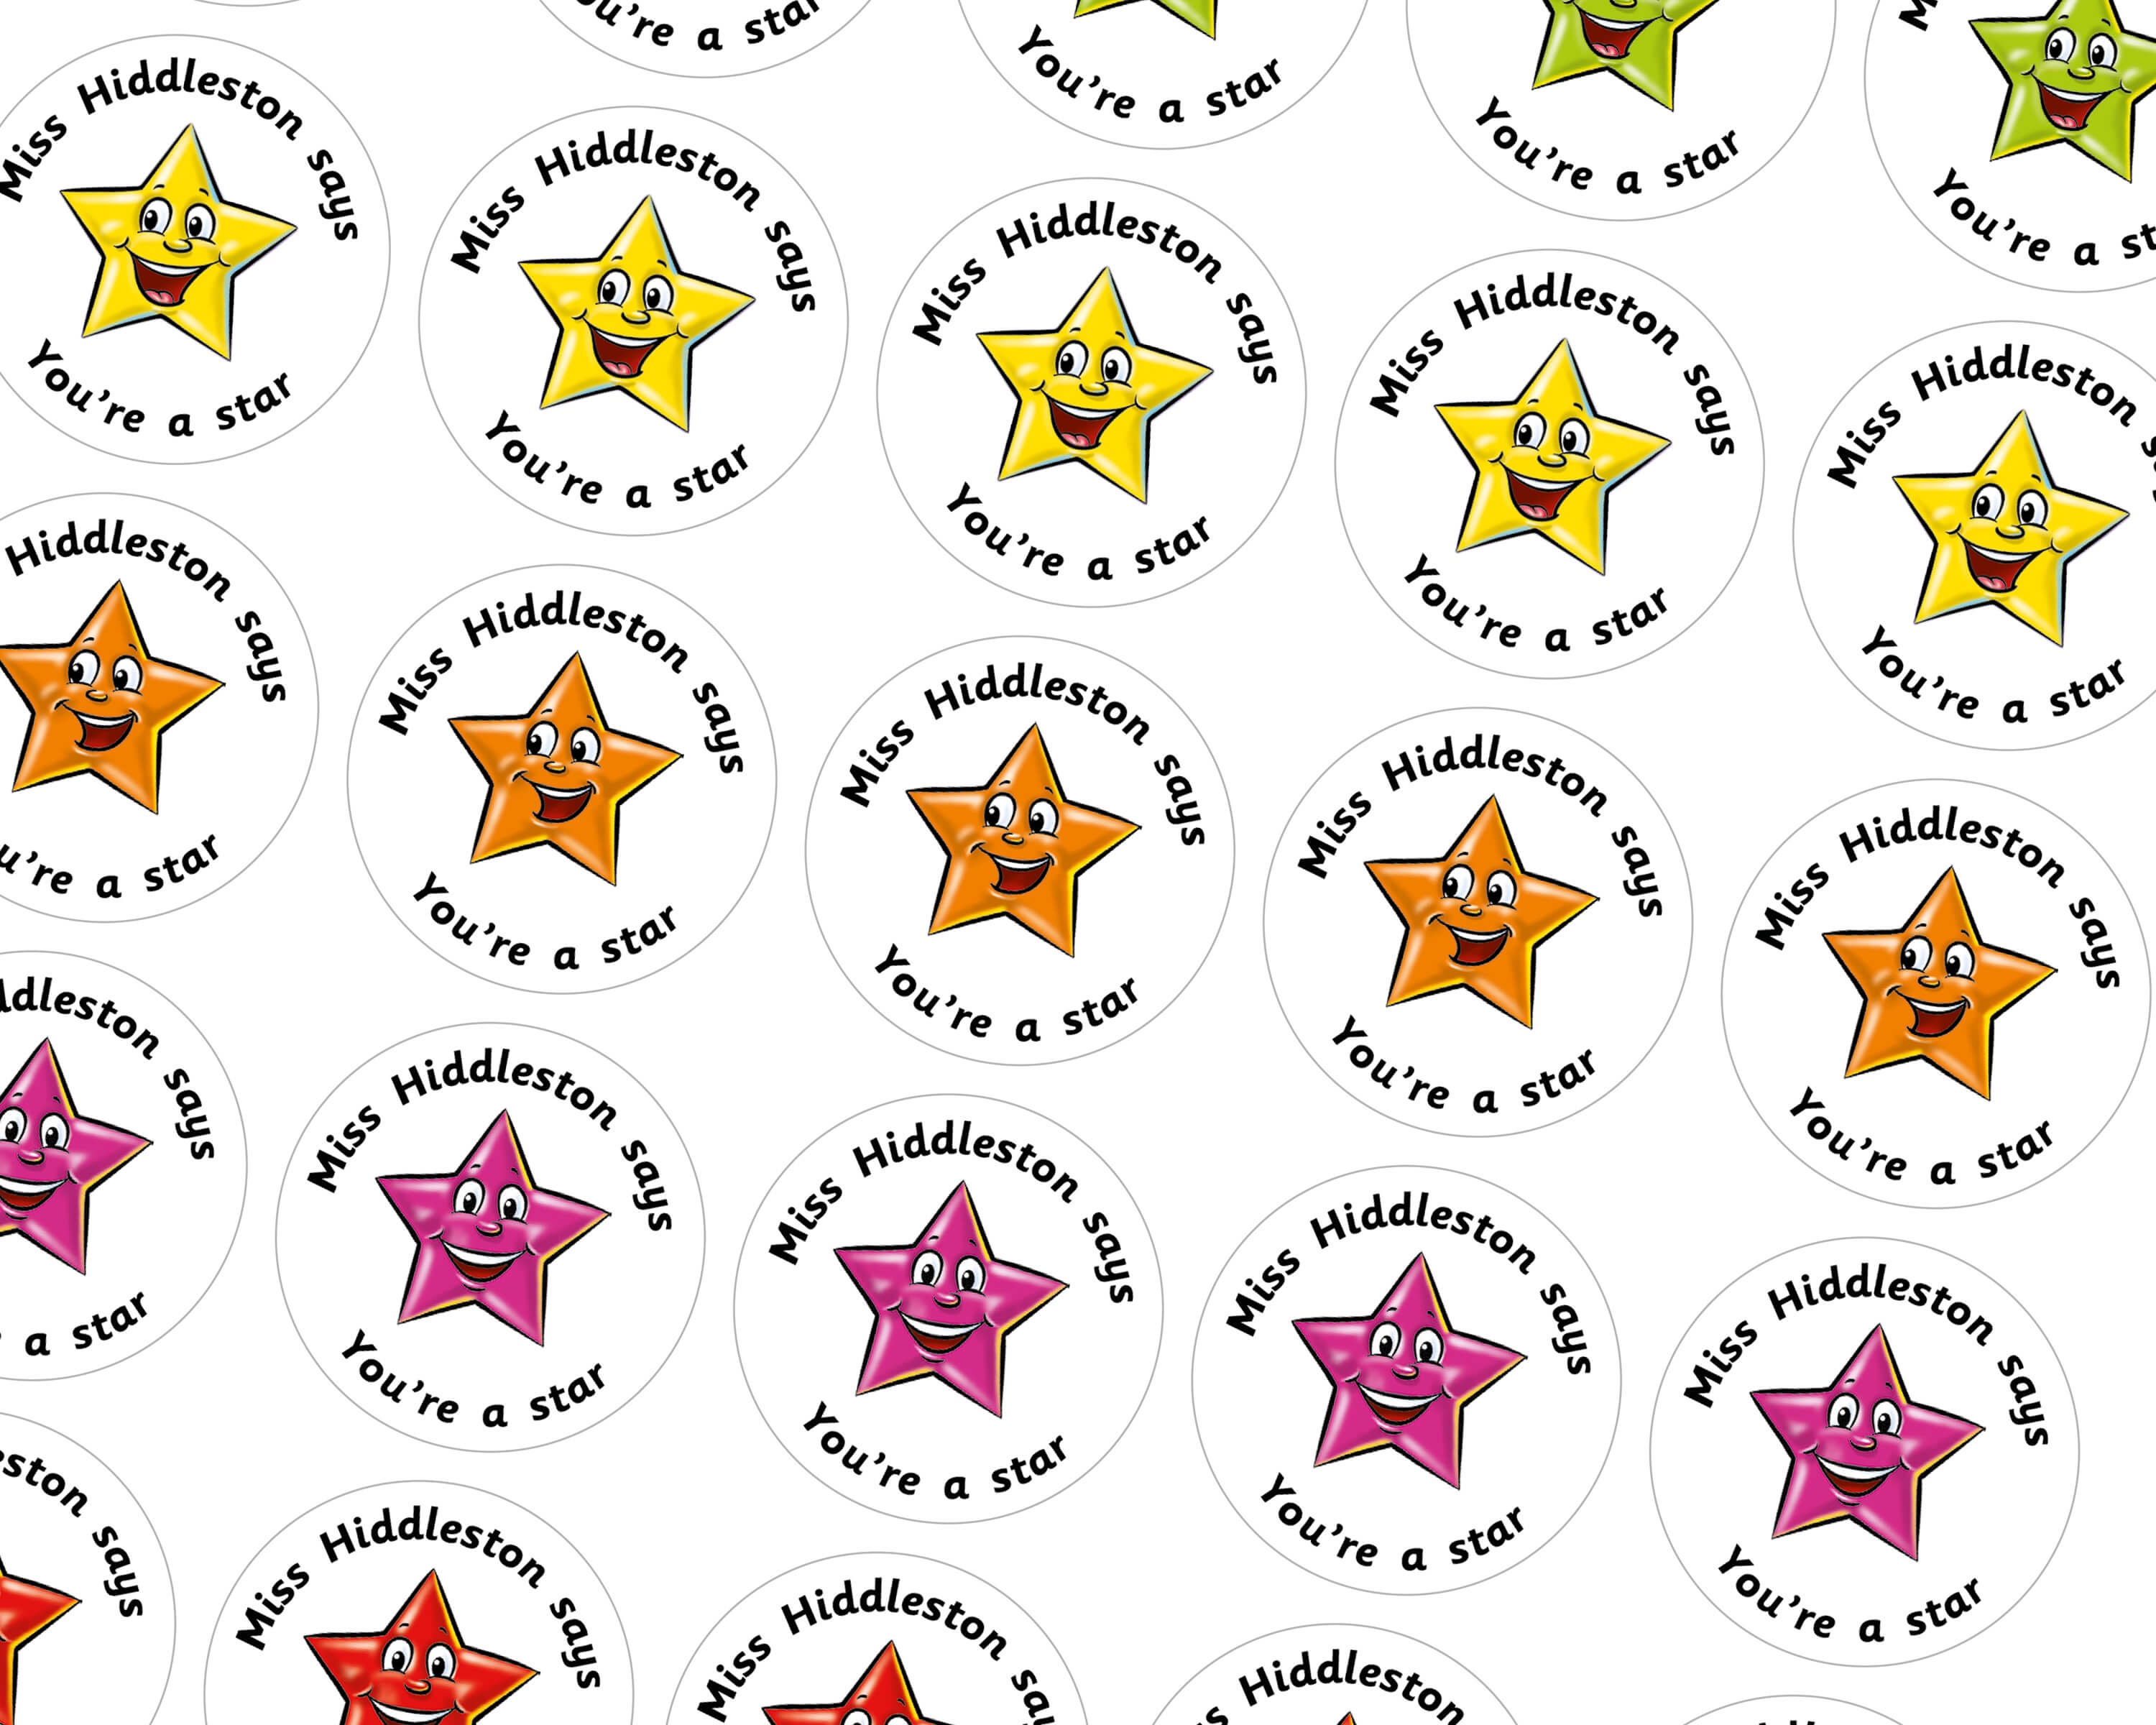 Positive Affirmation Stickers, 32mm